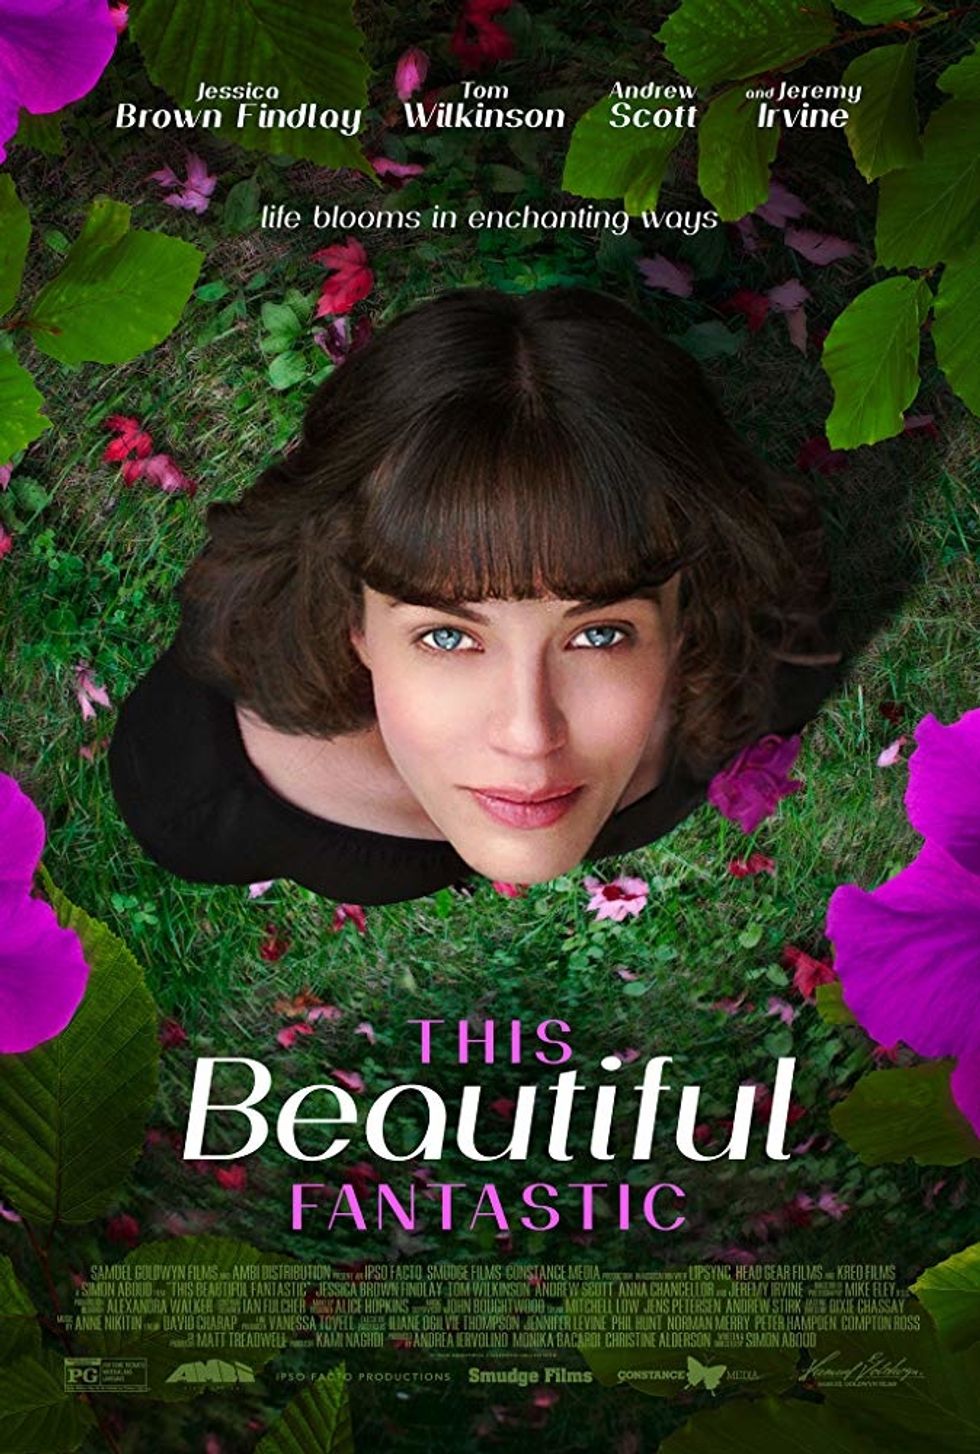 This Beautiful Fantastic Movie Serves Up Joy On a Stormy Day